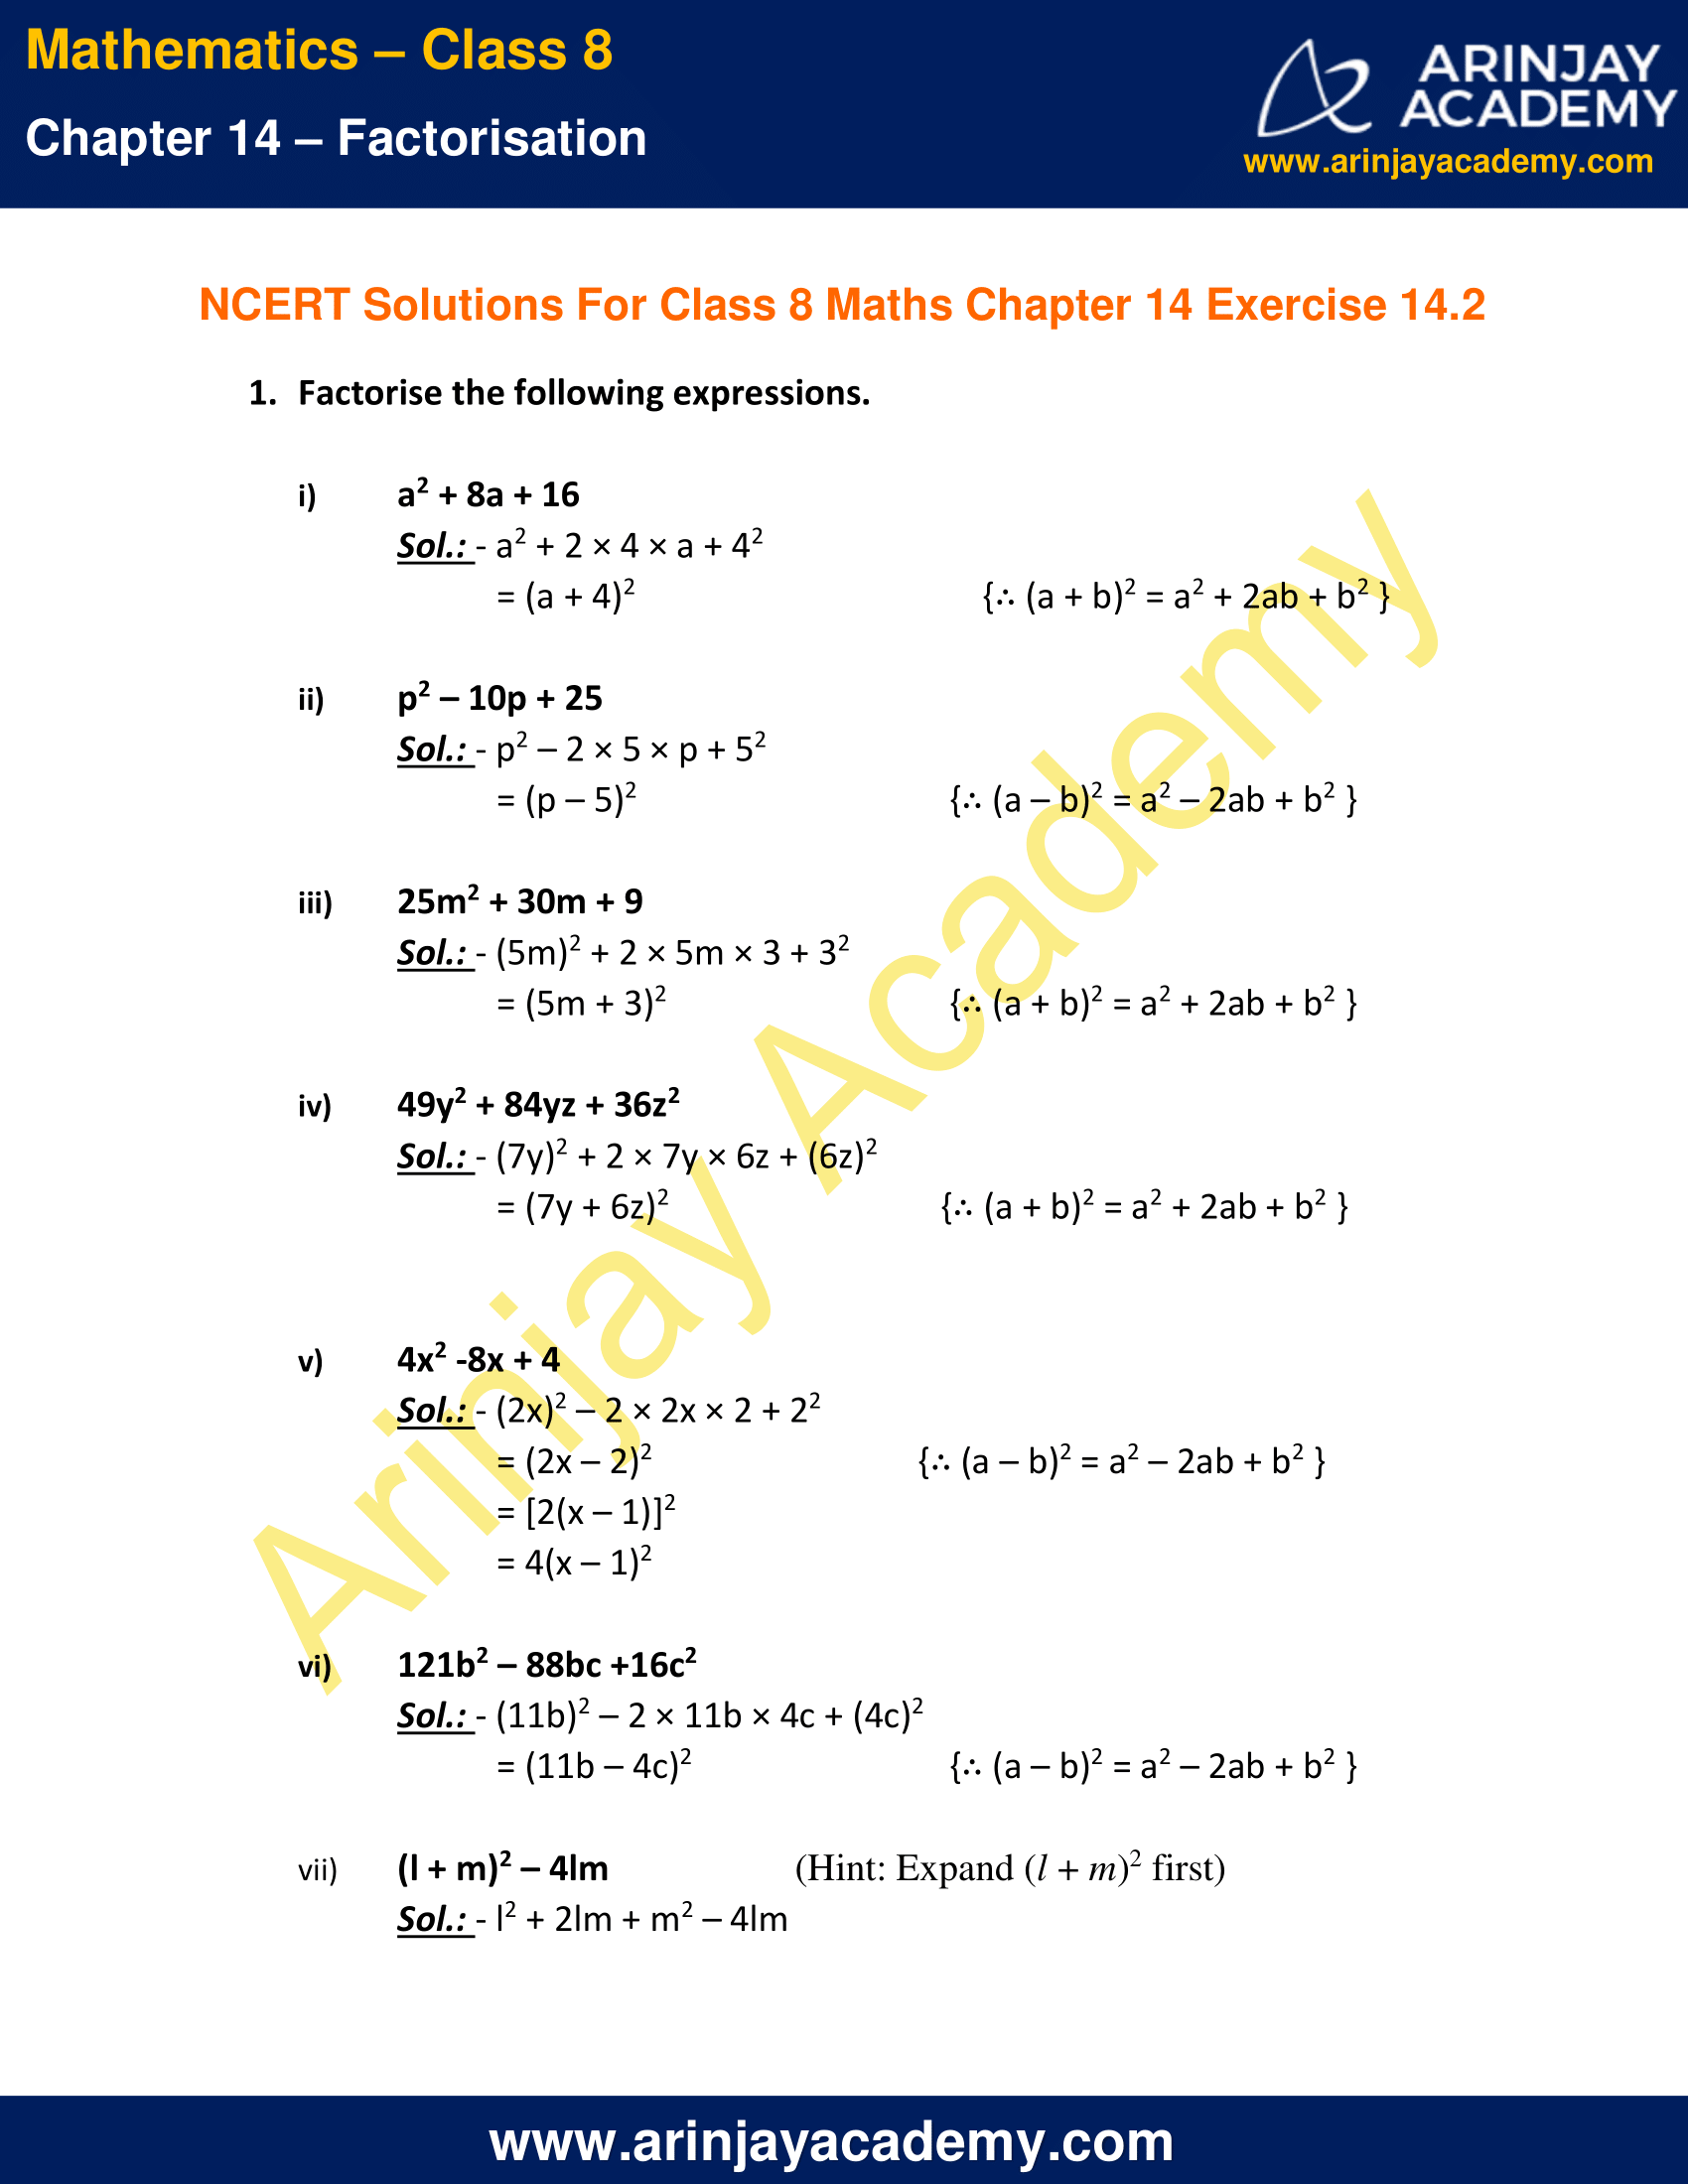 ncert-solutions-for-class-8-maths-exercise-2-2-chapter-2-linear-equations-in-one-variable